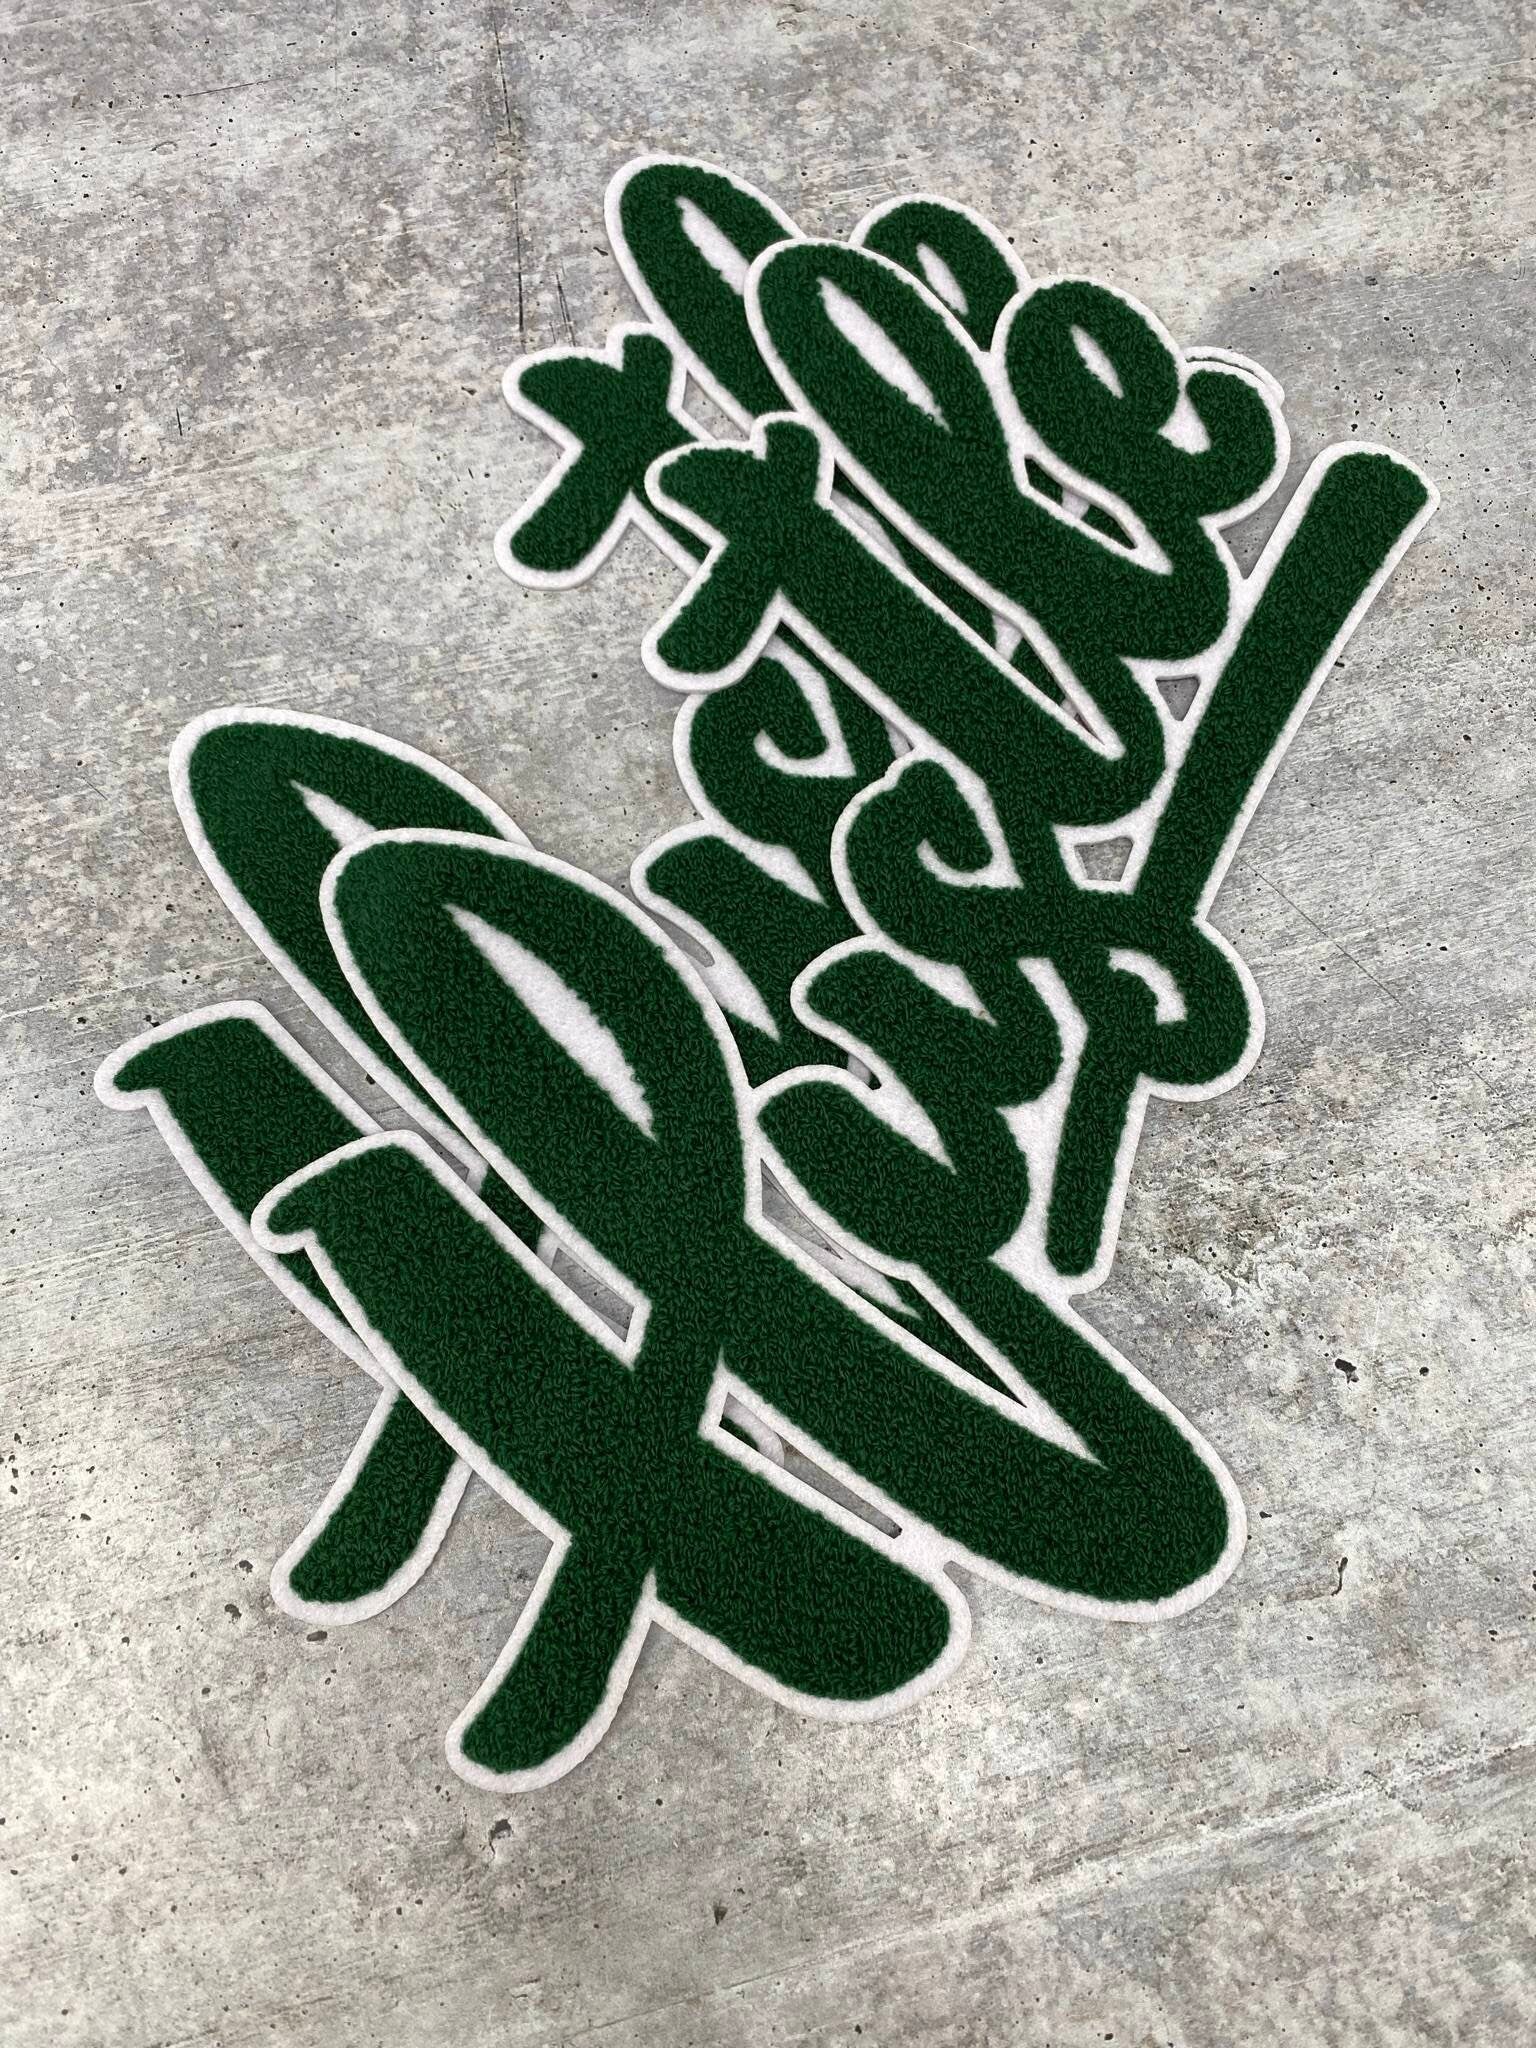 Exclusive, Green & White "Hustle" Chenille Patch (iron-on) Size 10"x8", Varsity Patch for Denim, Shirts and Hoodies, Large Patch